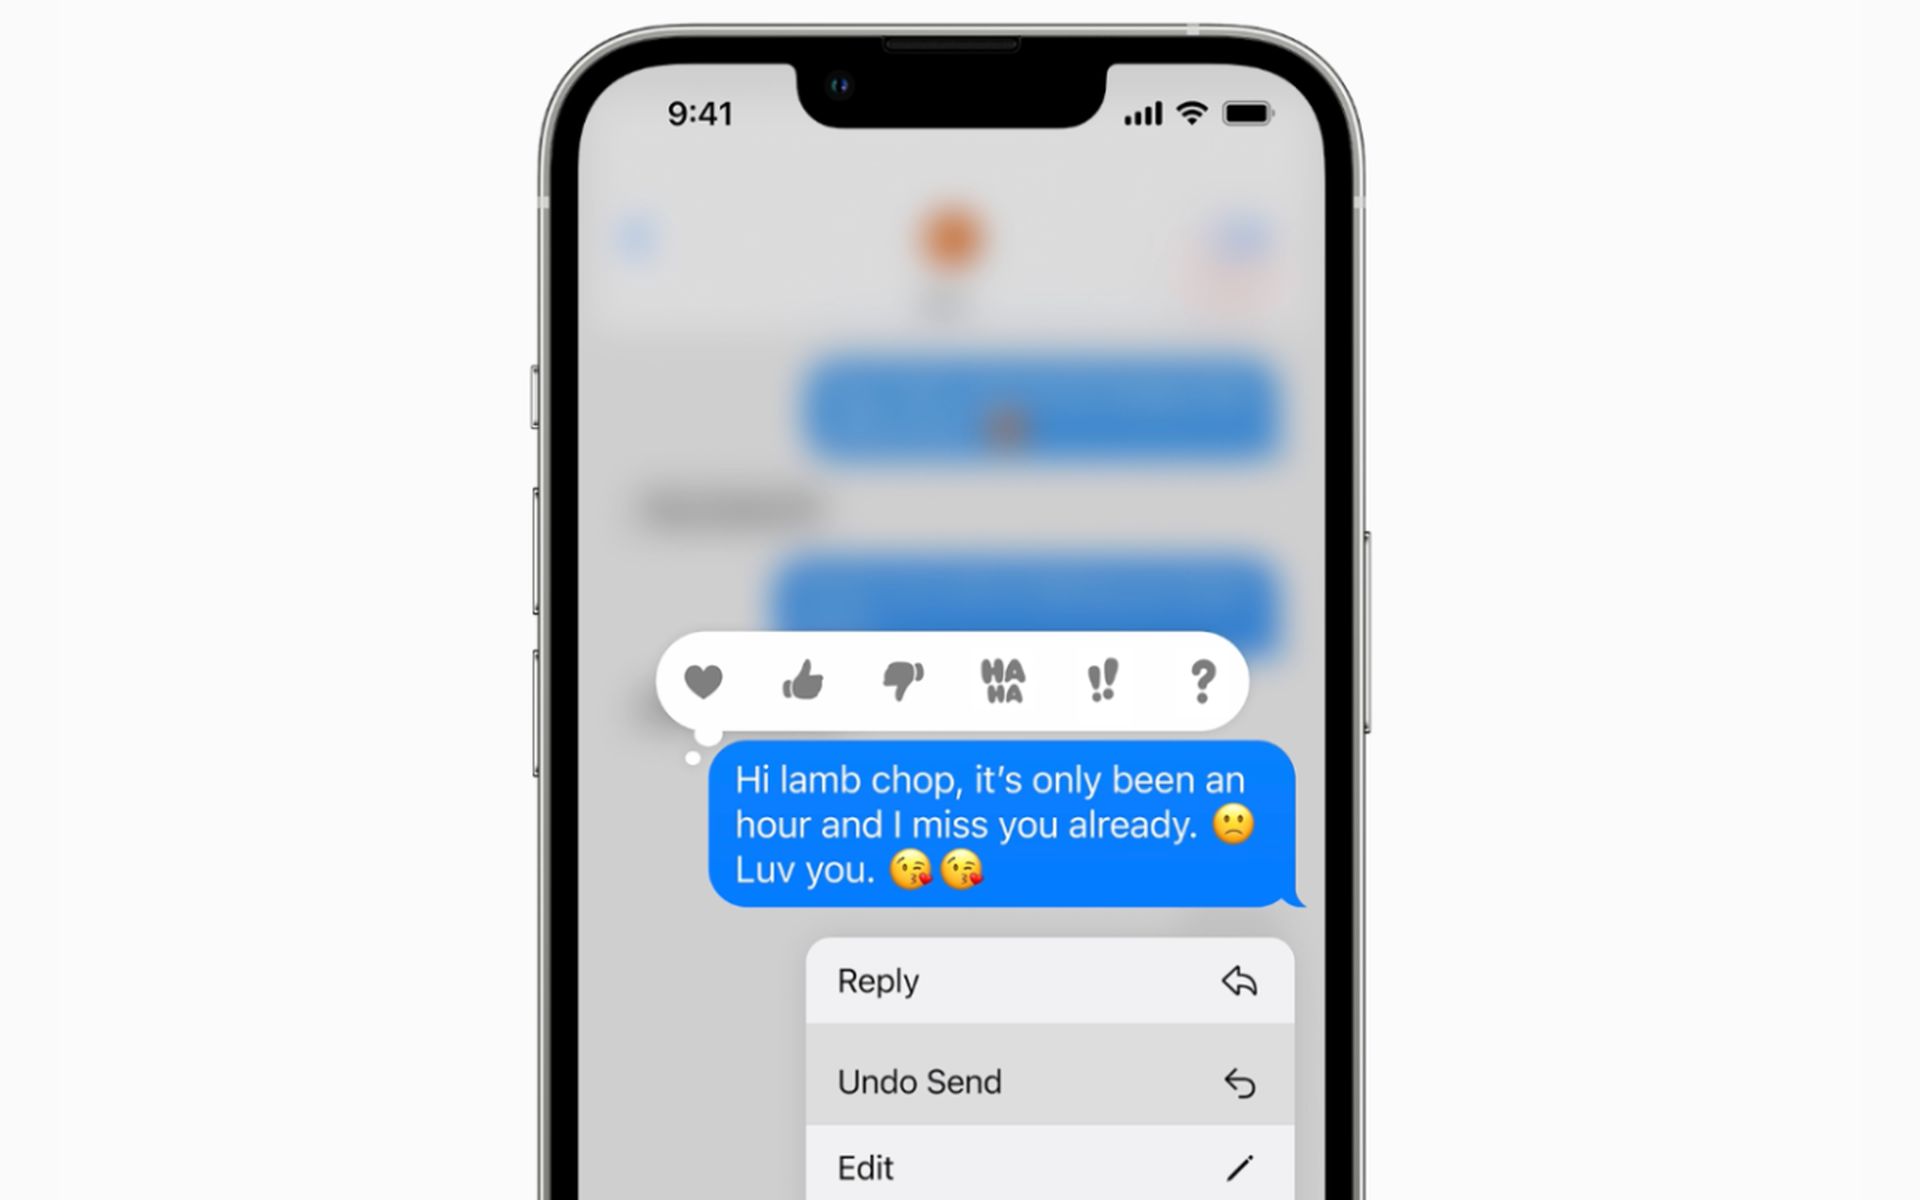 iOS 16: How to edit messages on iPhone?